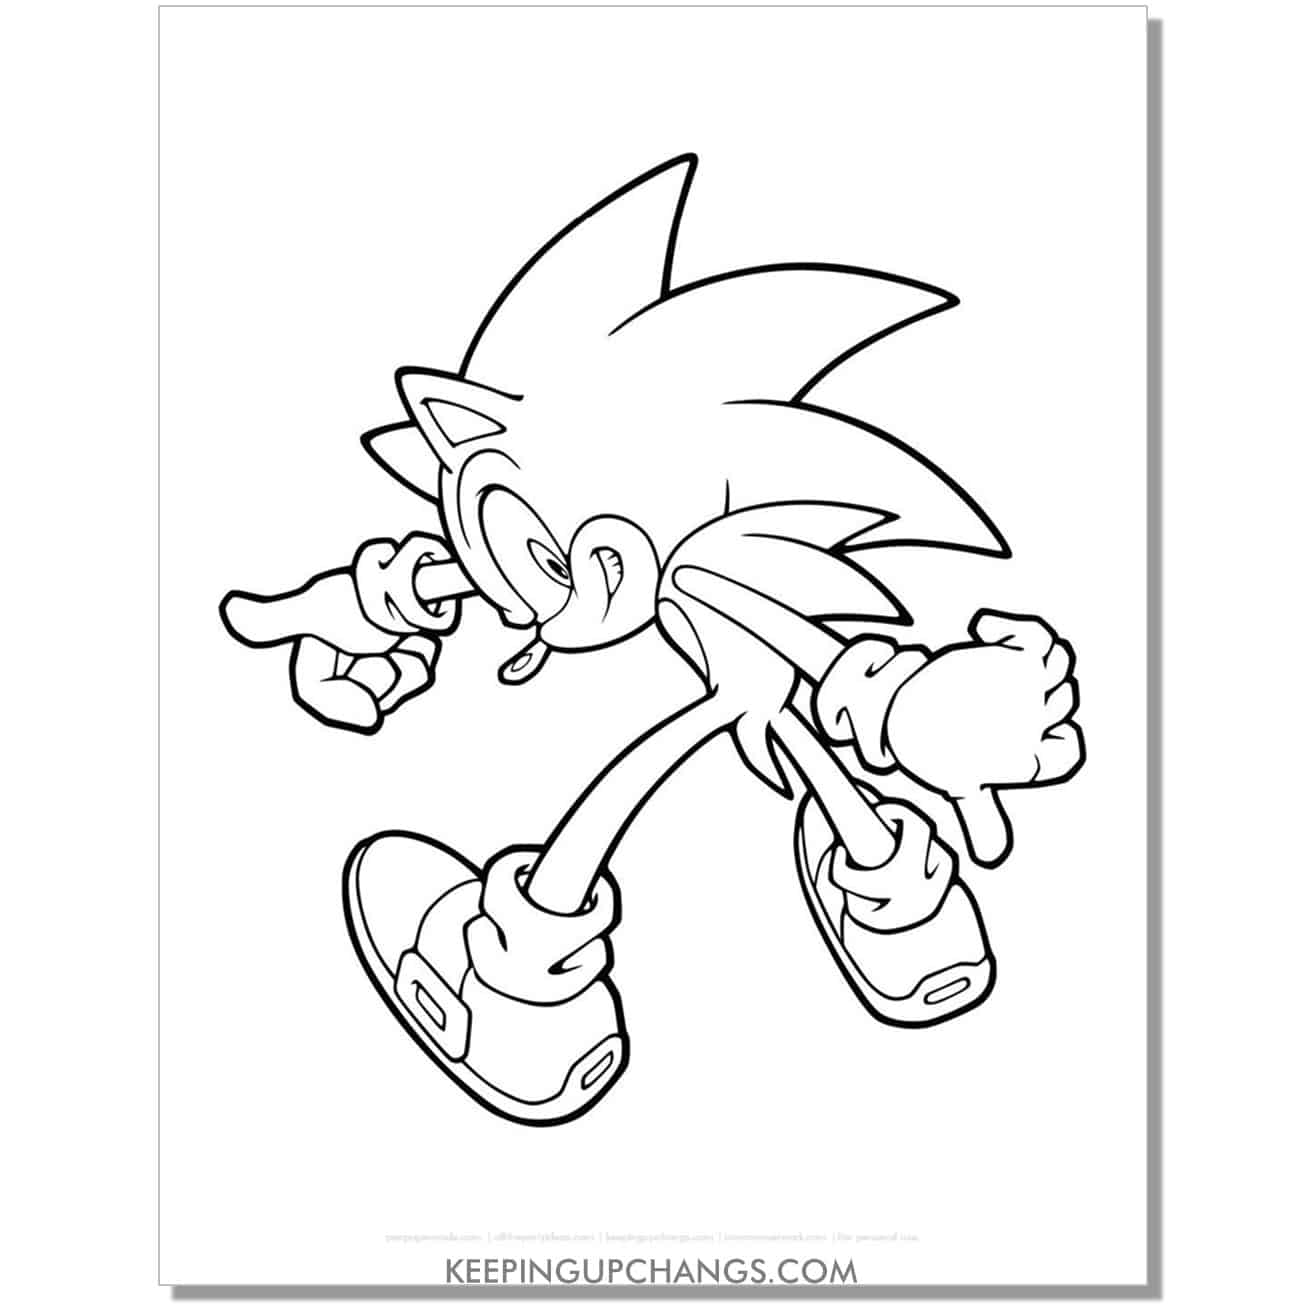 sonic looking back with one arm in front and one in back coloring page.